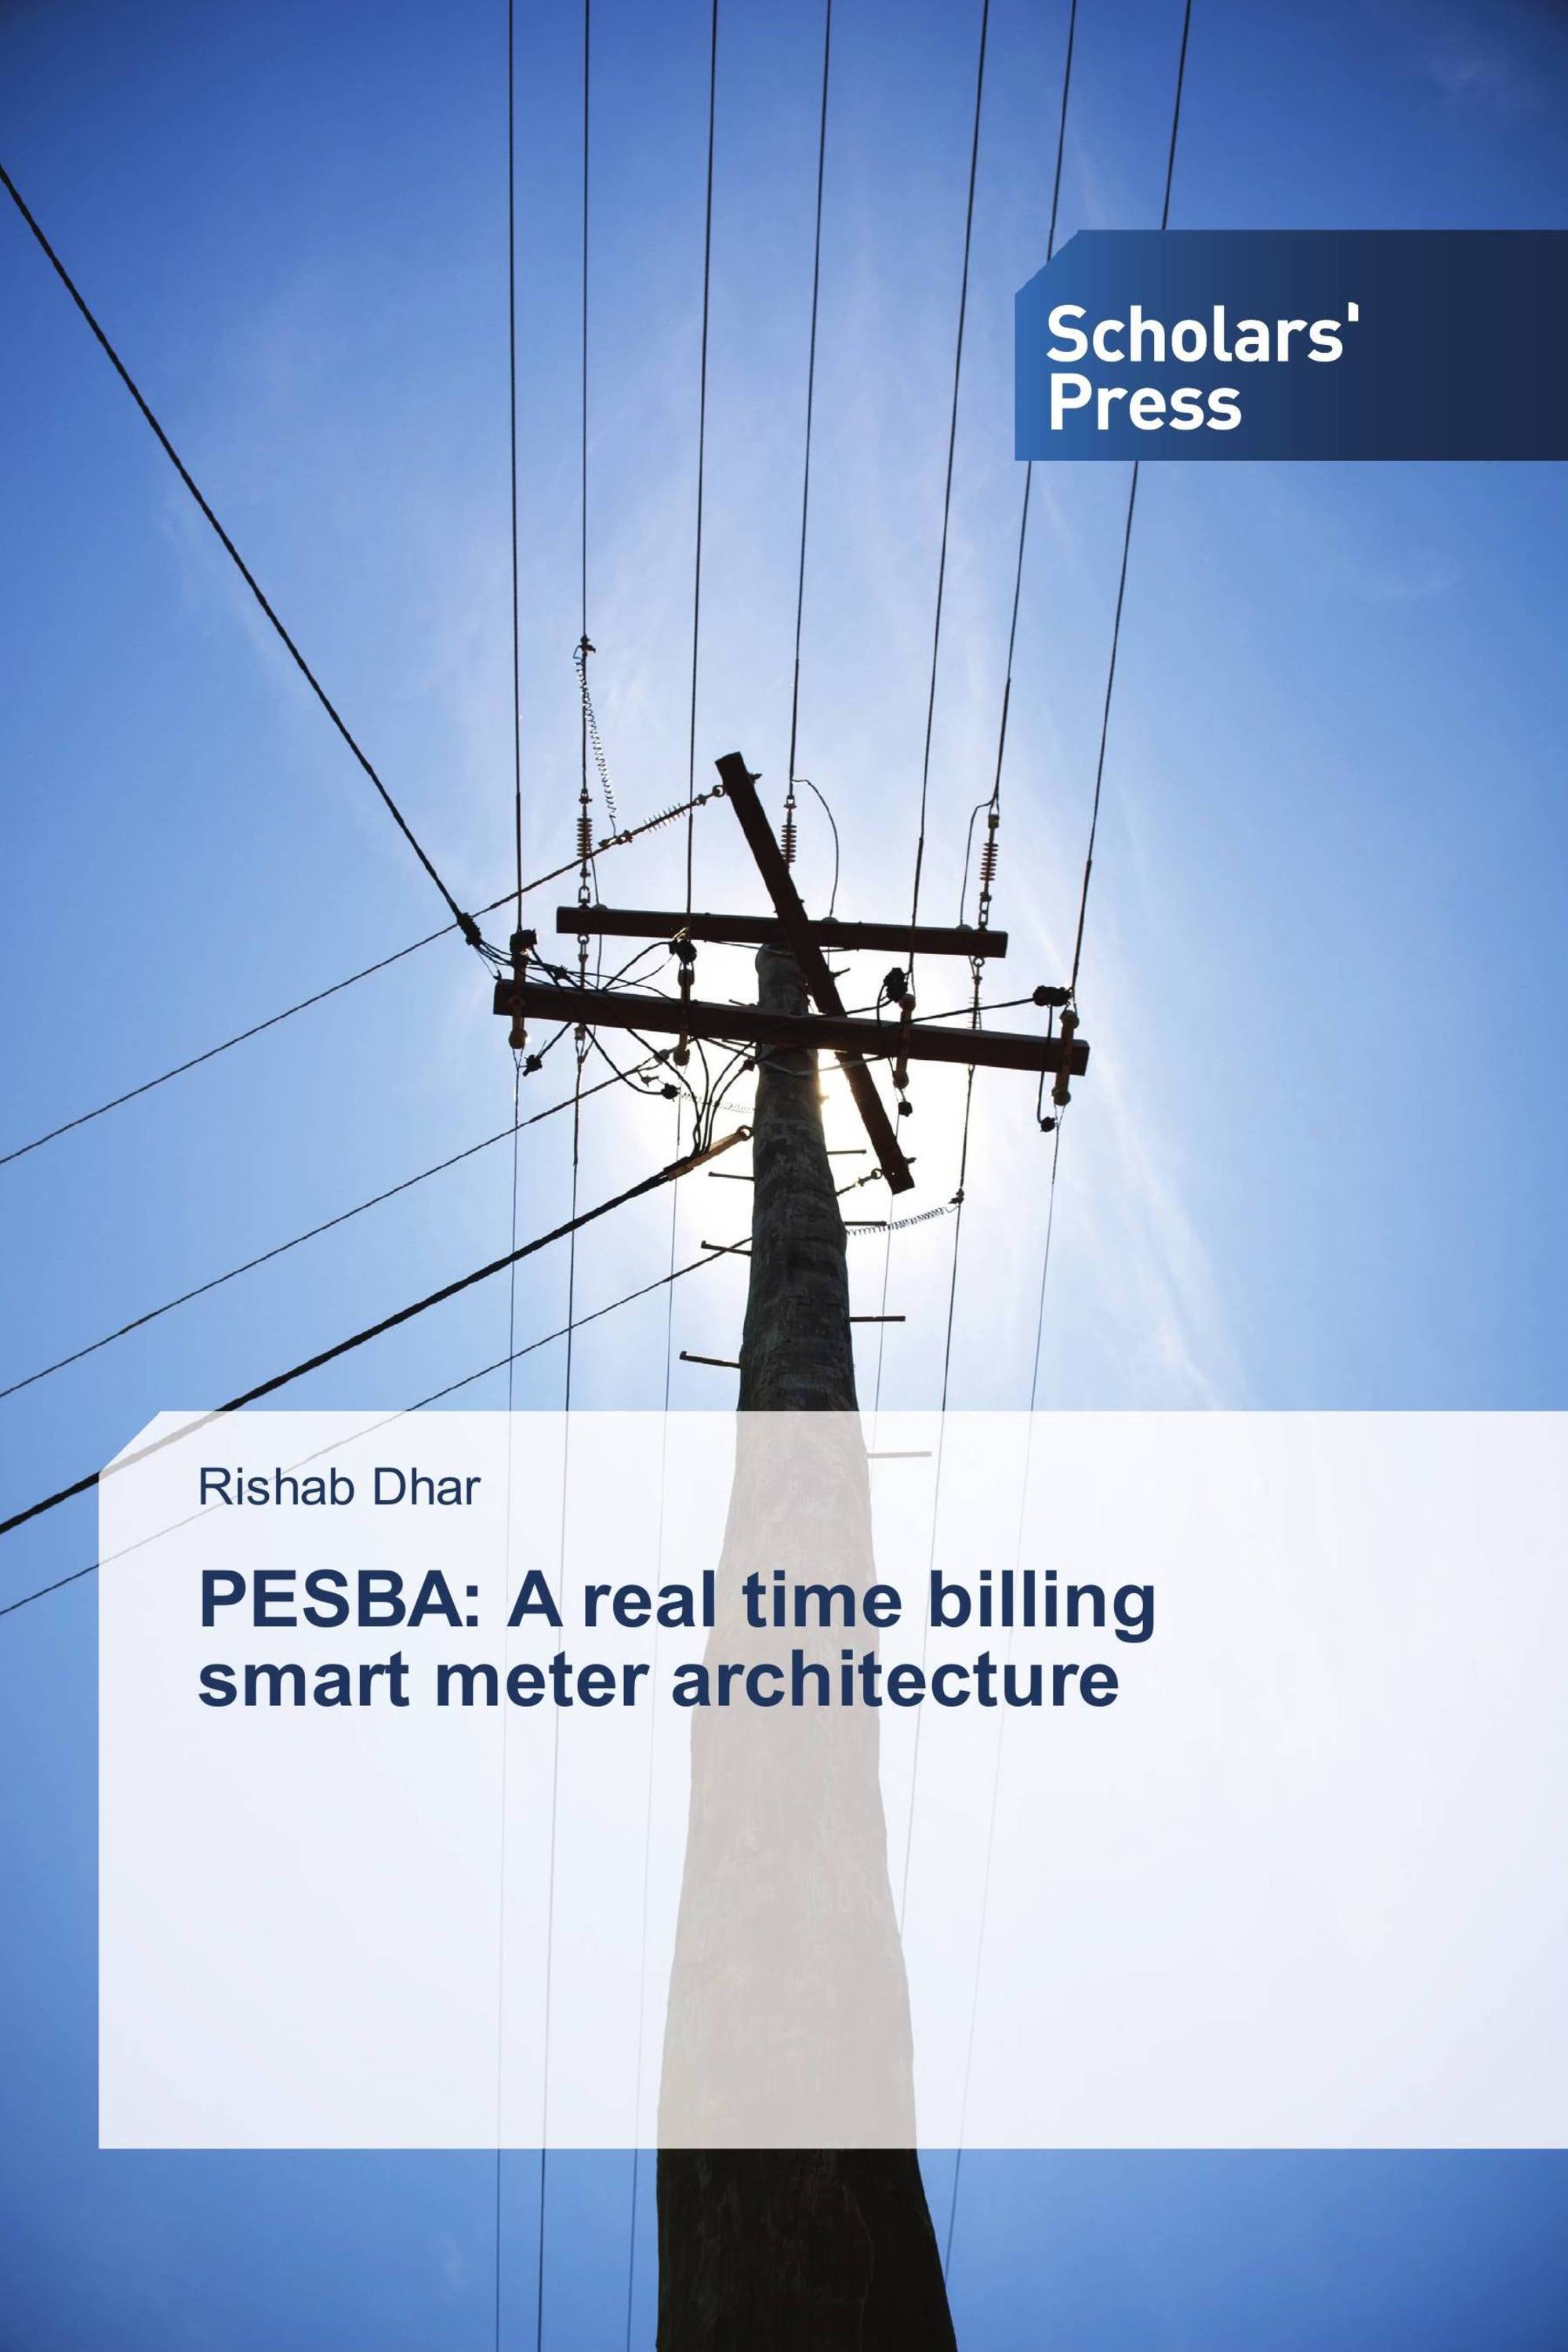 PESBA: A real time billing smart meter architecture